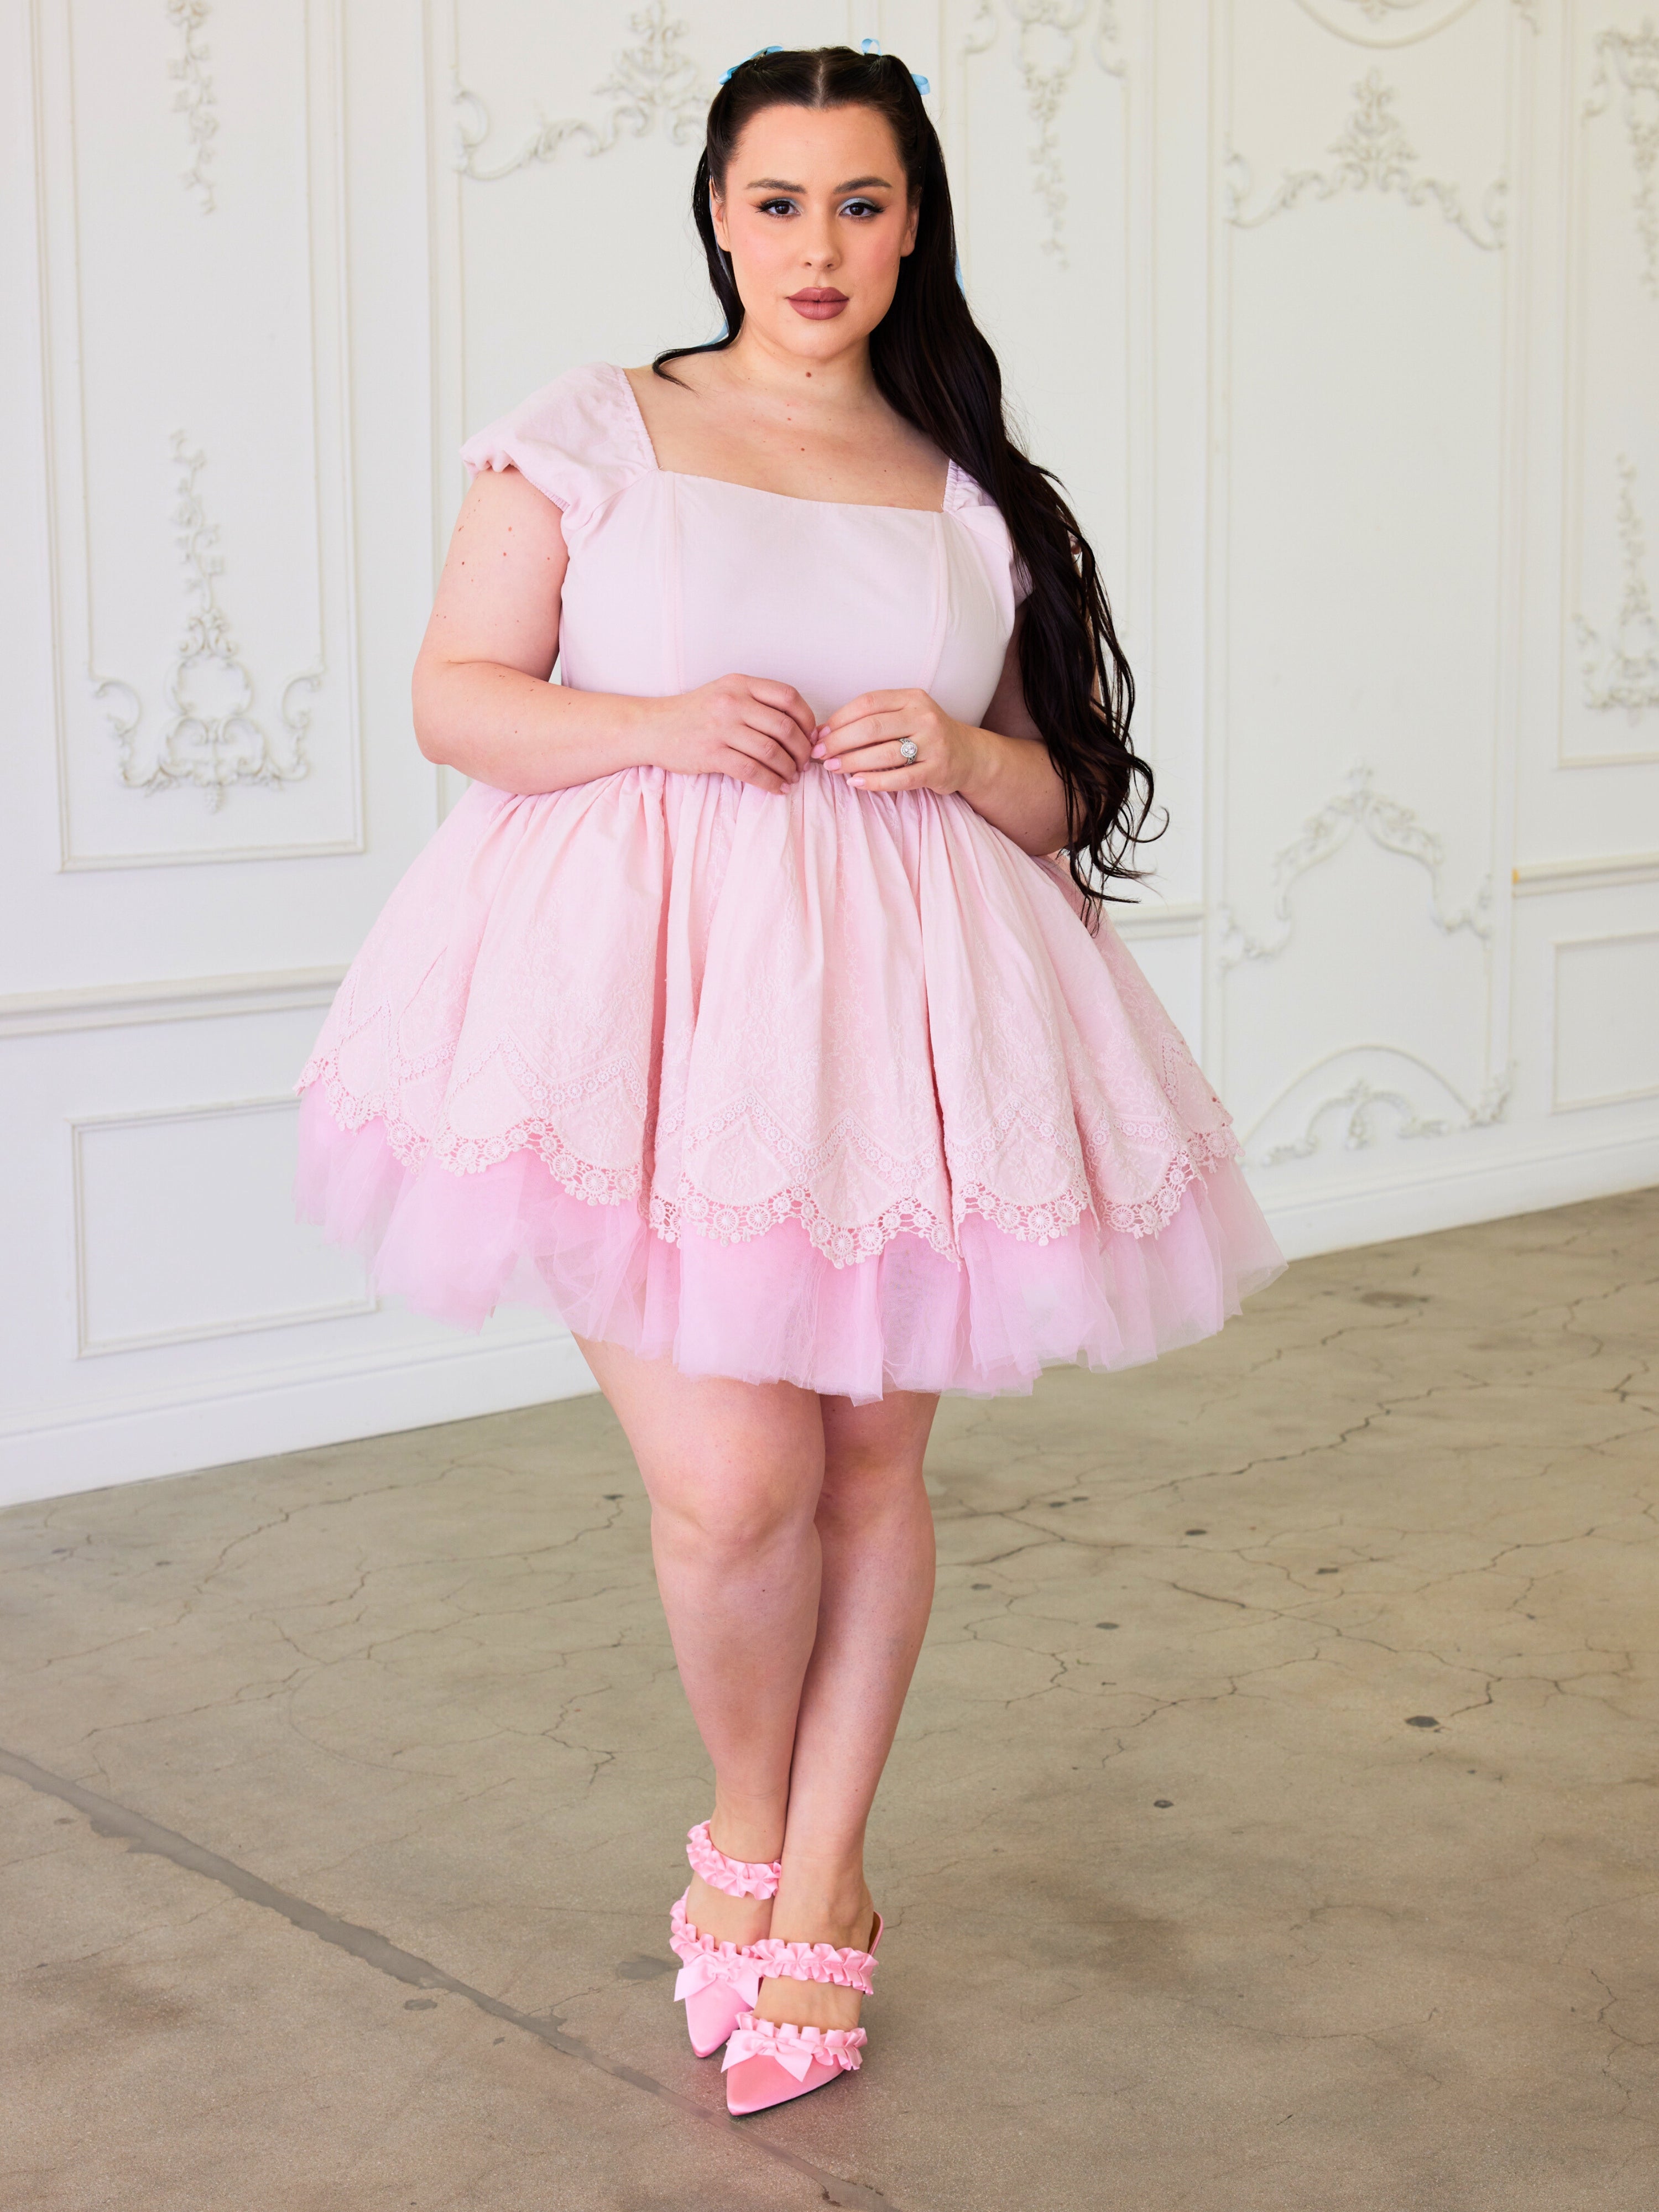 The Soft Pink Blossom Dress - Welcoming the Blossom Mini in Soft Pink, a captivating ensemble that marries the timeless elegance of the Magnolia Puff silhouette with the fresh charm of spring. Crafted from 100% cotton, this dress is a testament to the bea